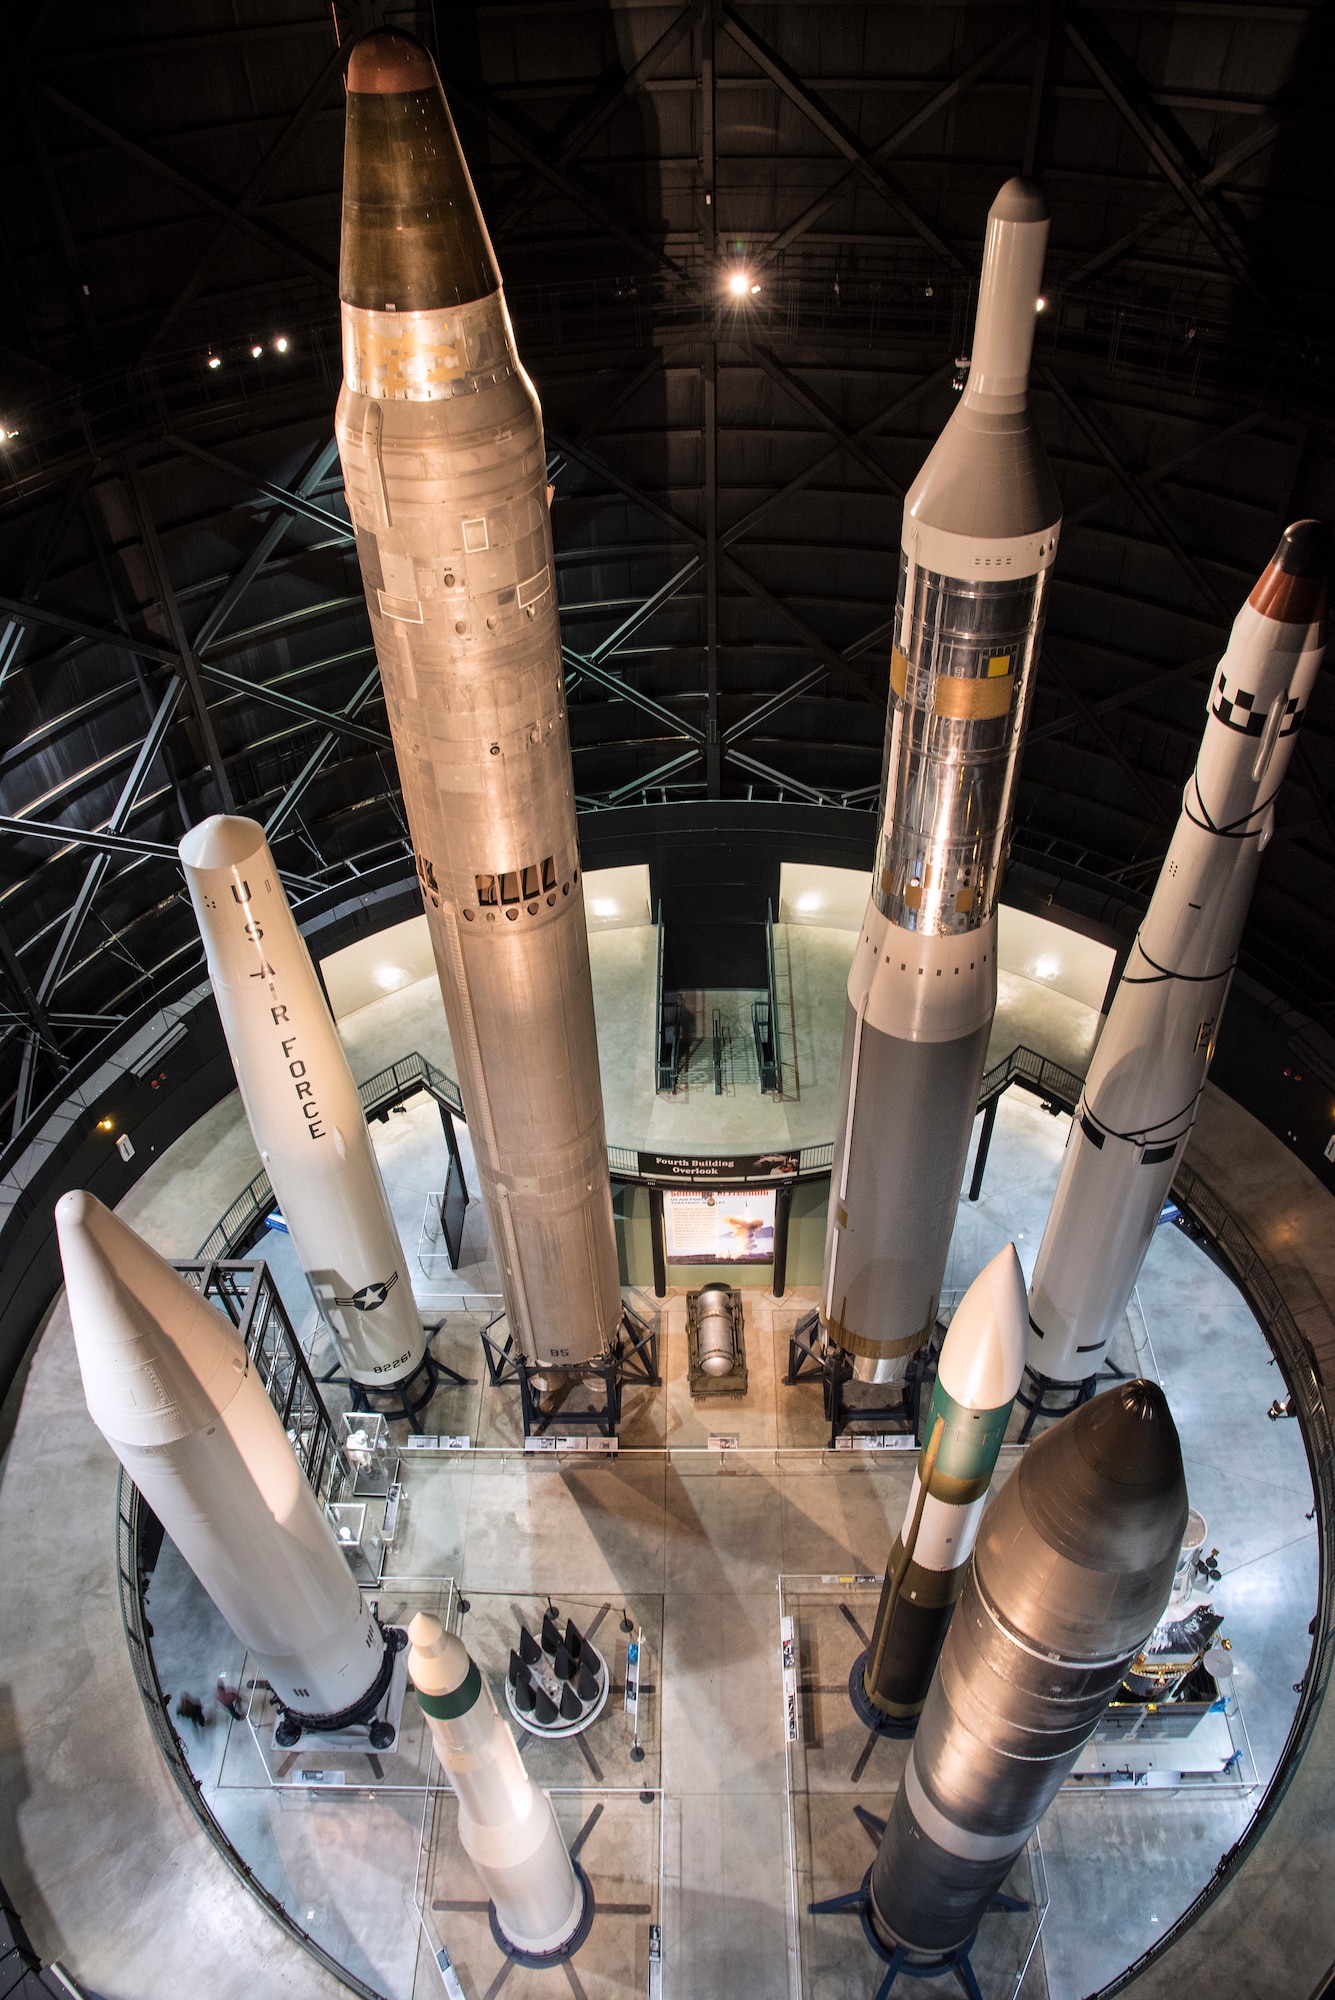 DAYTON, Ohio - Missile Gallery overview at the National Museum of the U.S. Air Force. (U.S. Air Force photo by Ken LaRock)